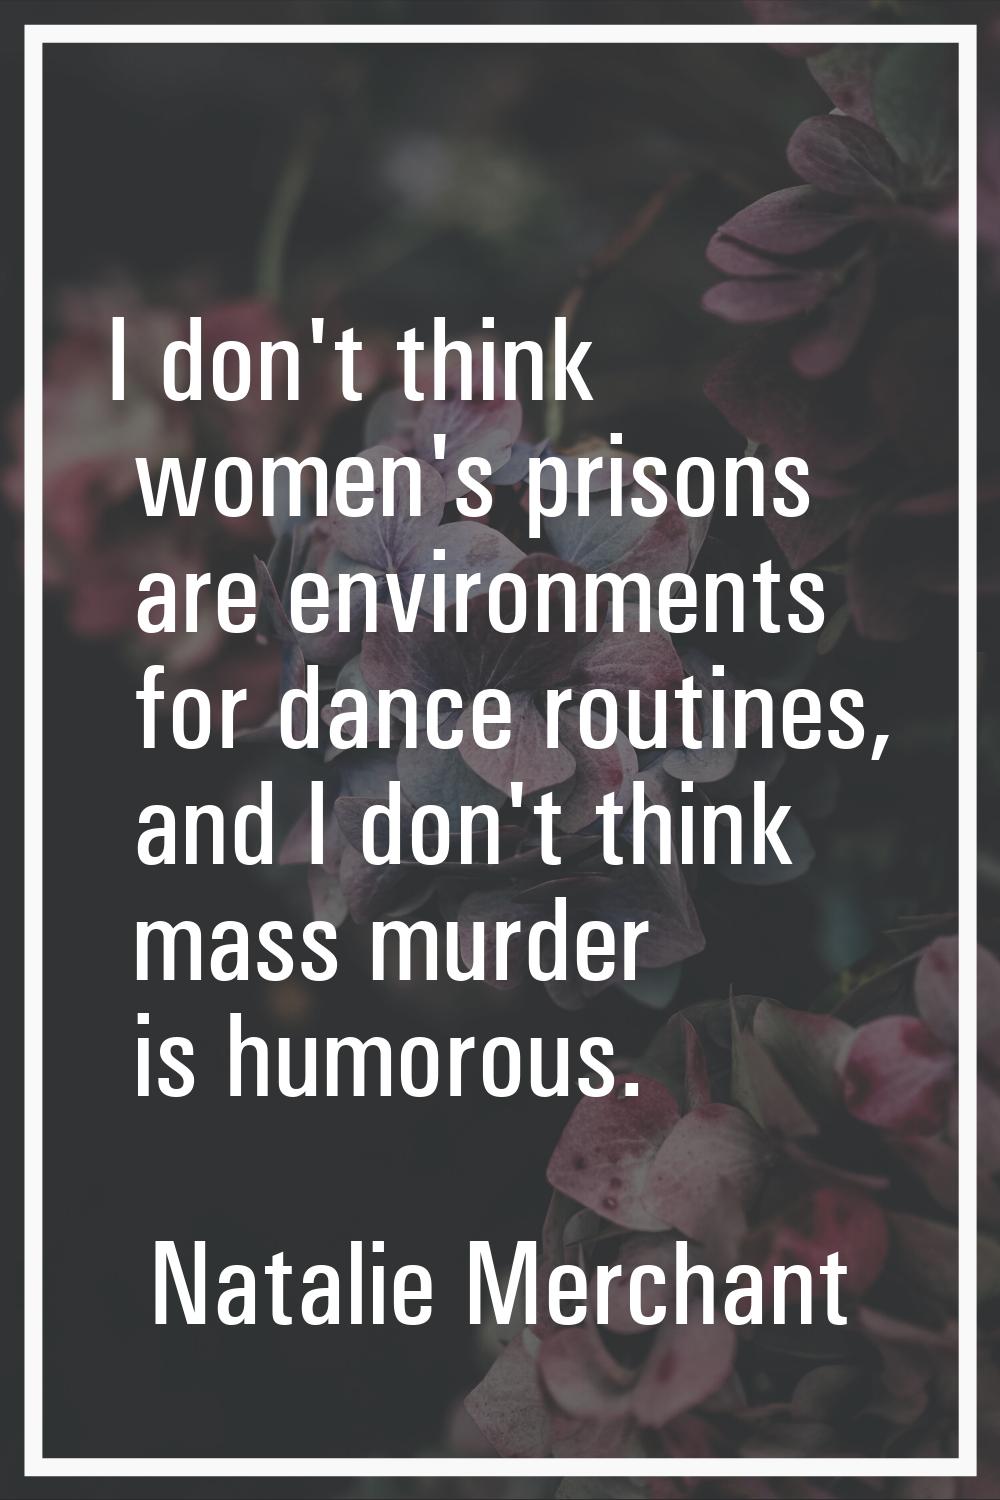 I don't think women's prisons are environments for dance routines, and I don't think mass murder is